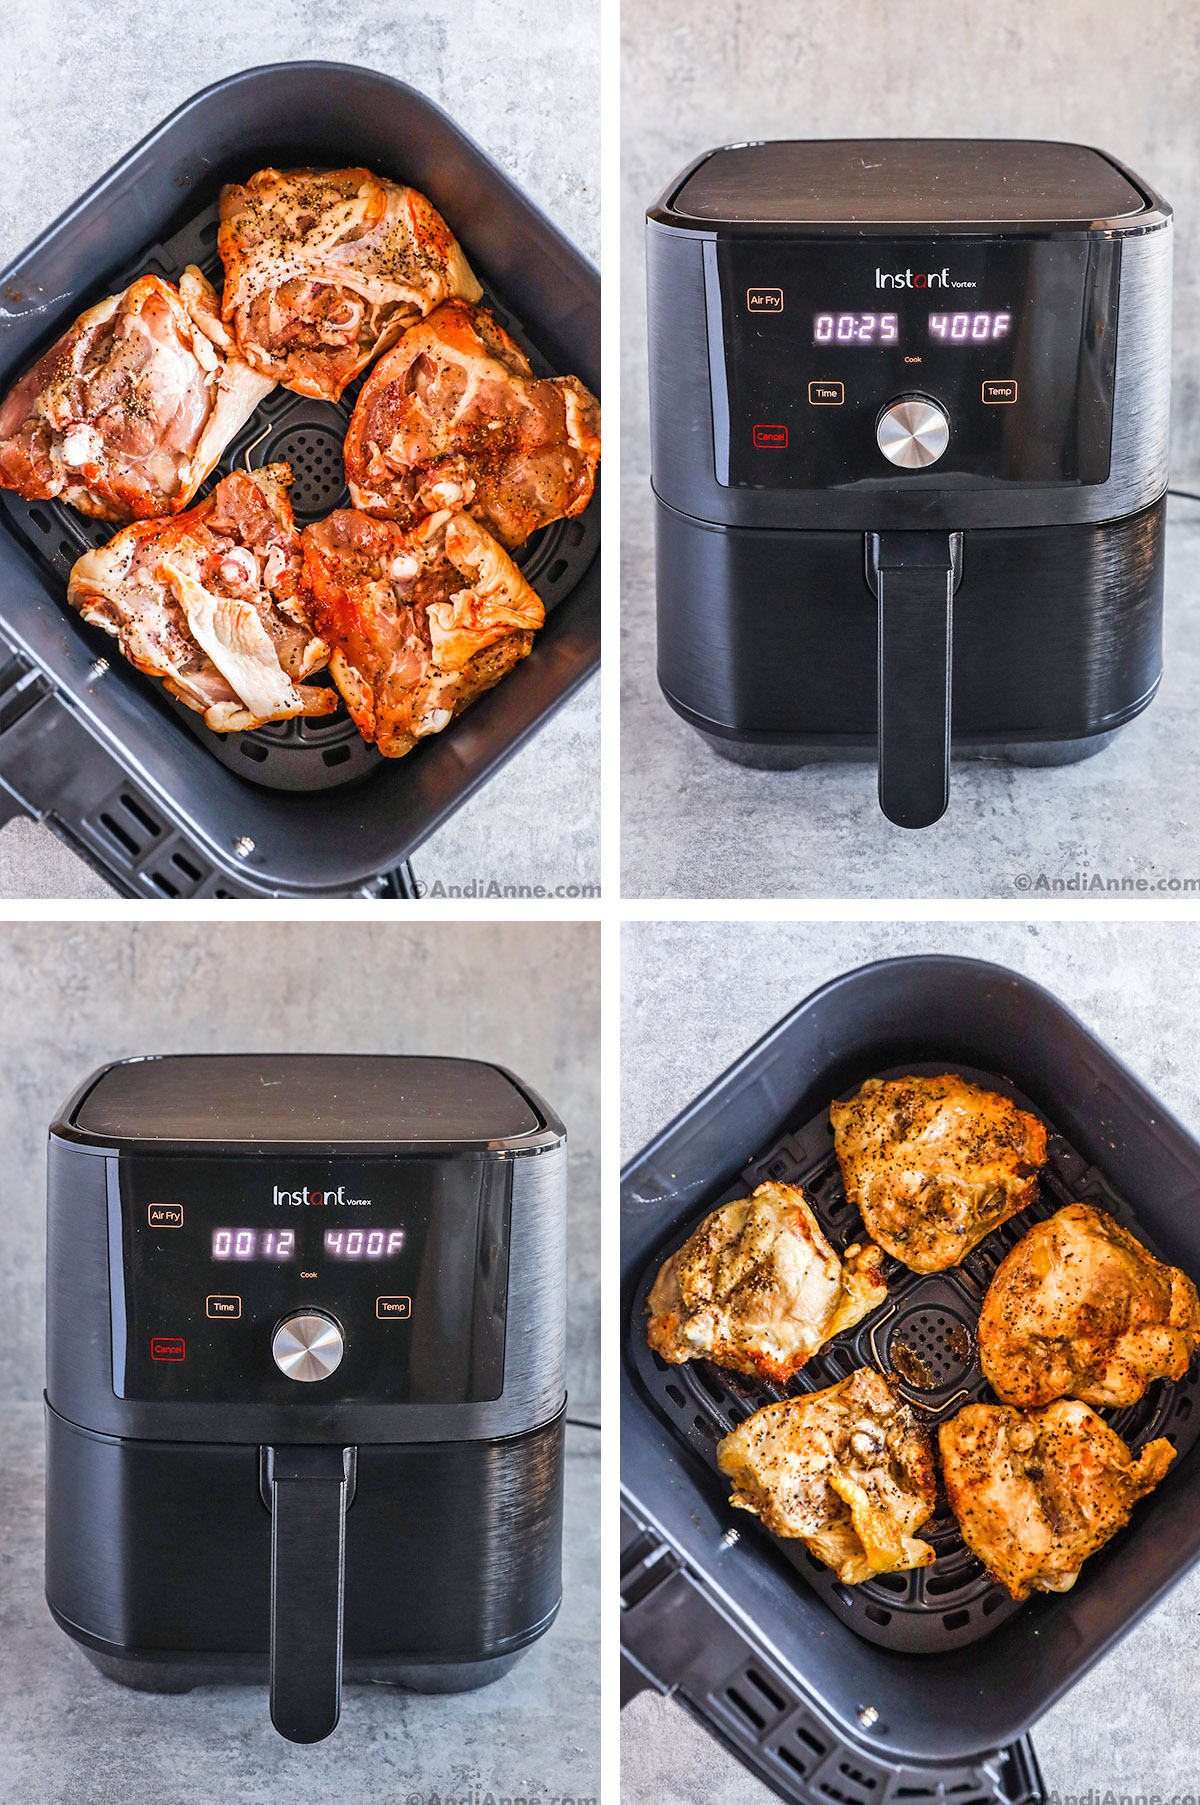 Four images of an air fryer, two are chicken things upside down in the air fryer basket.